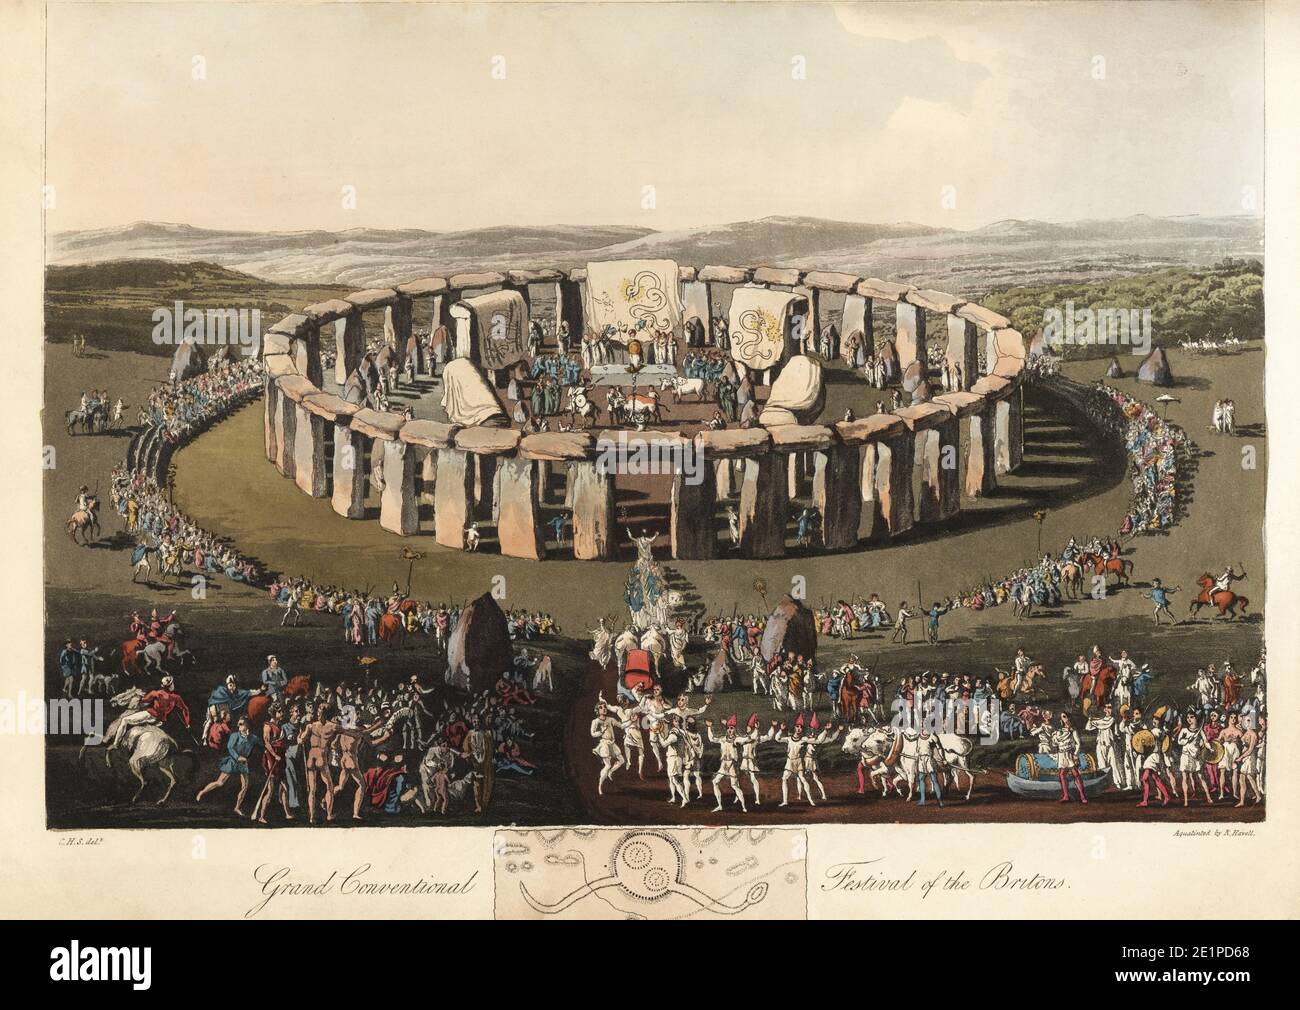 Grand Conventional Festival of the Britons at Stonehenge, pre-Roman era. Druidic Helio-arkite ceremony on May eve, the stones covered with veils depicting the dragon king. Handcoloured aquatint by R. Havell from an illustration by Charles Hamilton Smith from Samuel Meyrick's Costume of the Original Inhabitants of the British Islands, London, 1821. Stock Photo